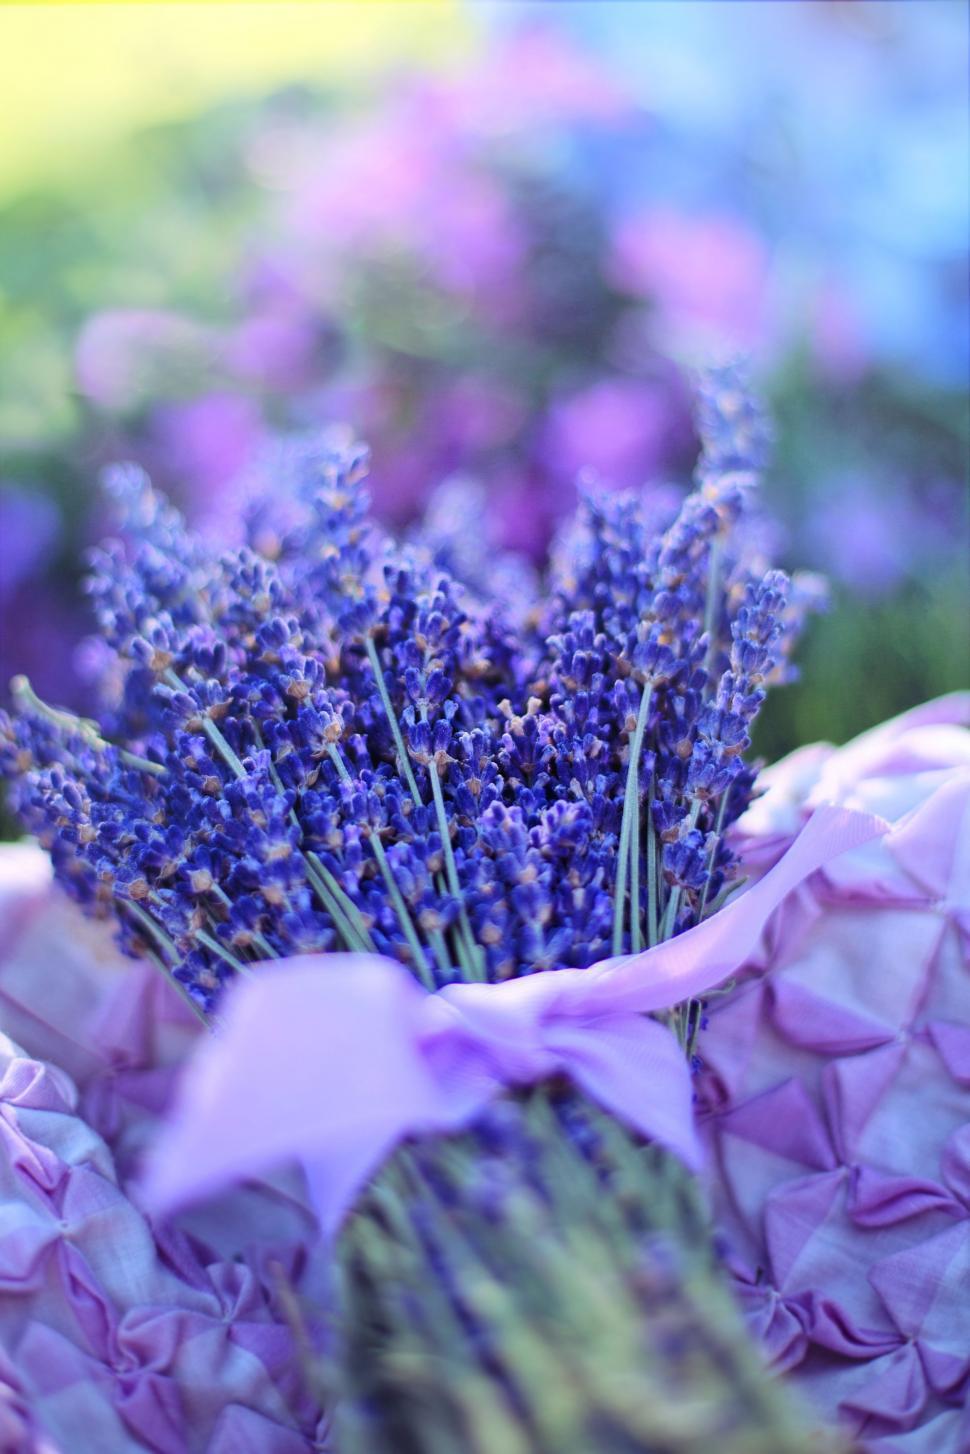 Free Image of Bouquet of Lavender Flowers 